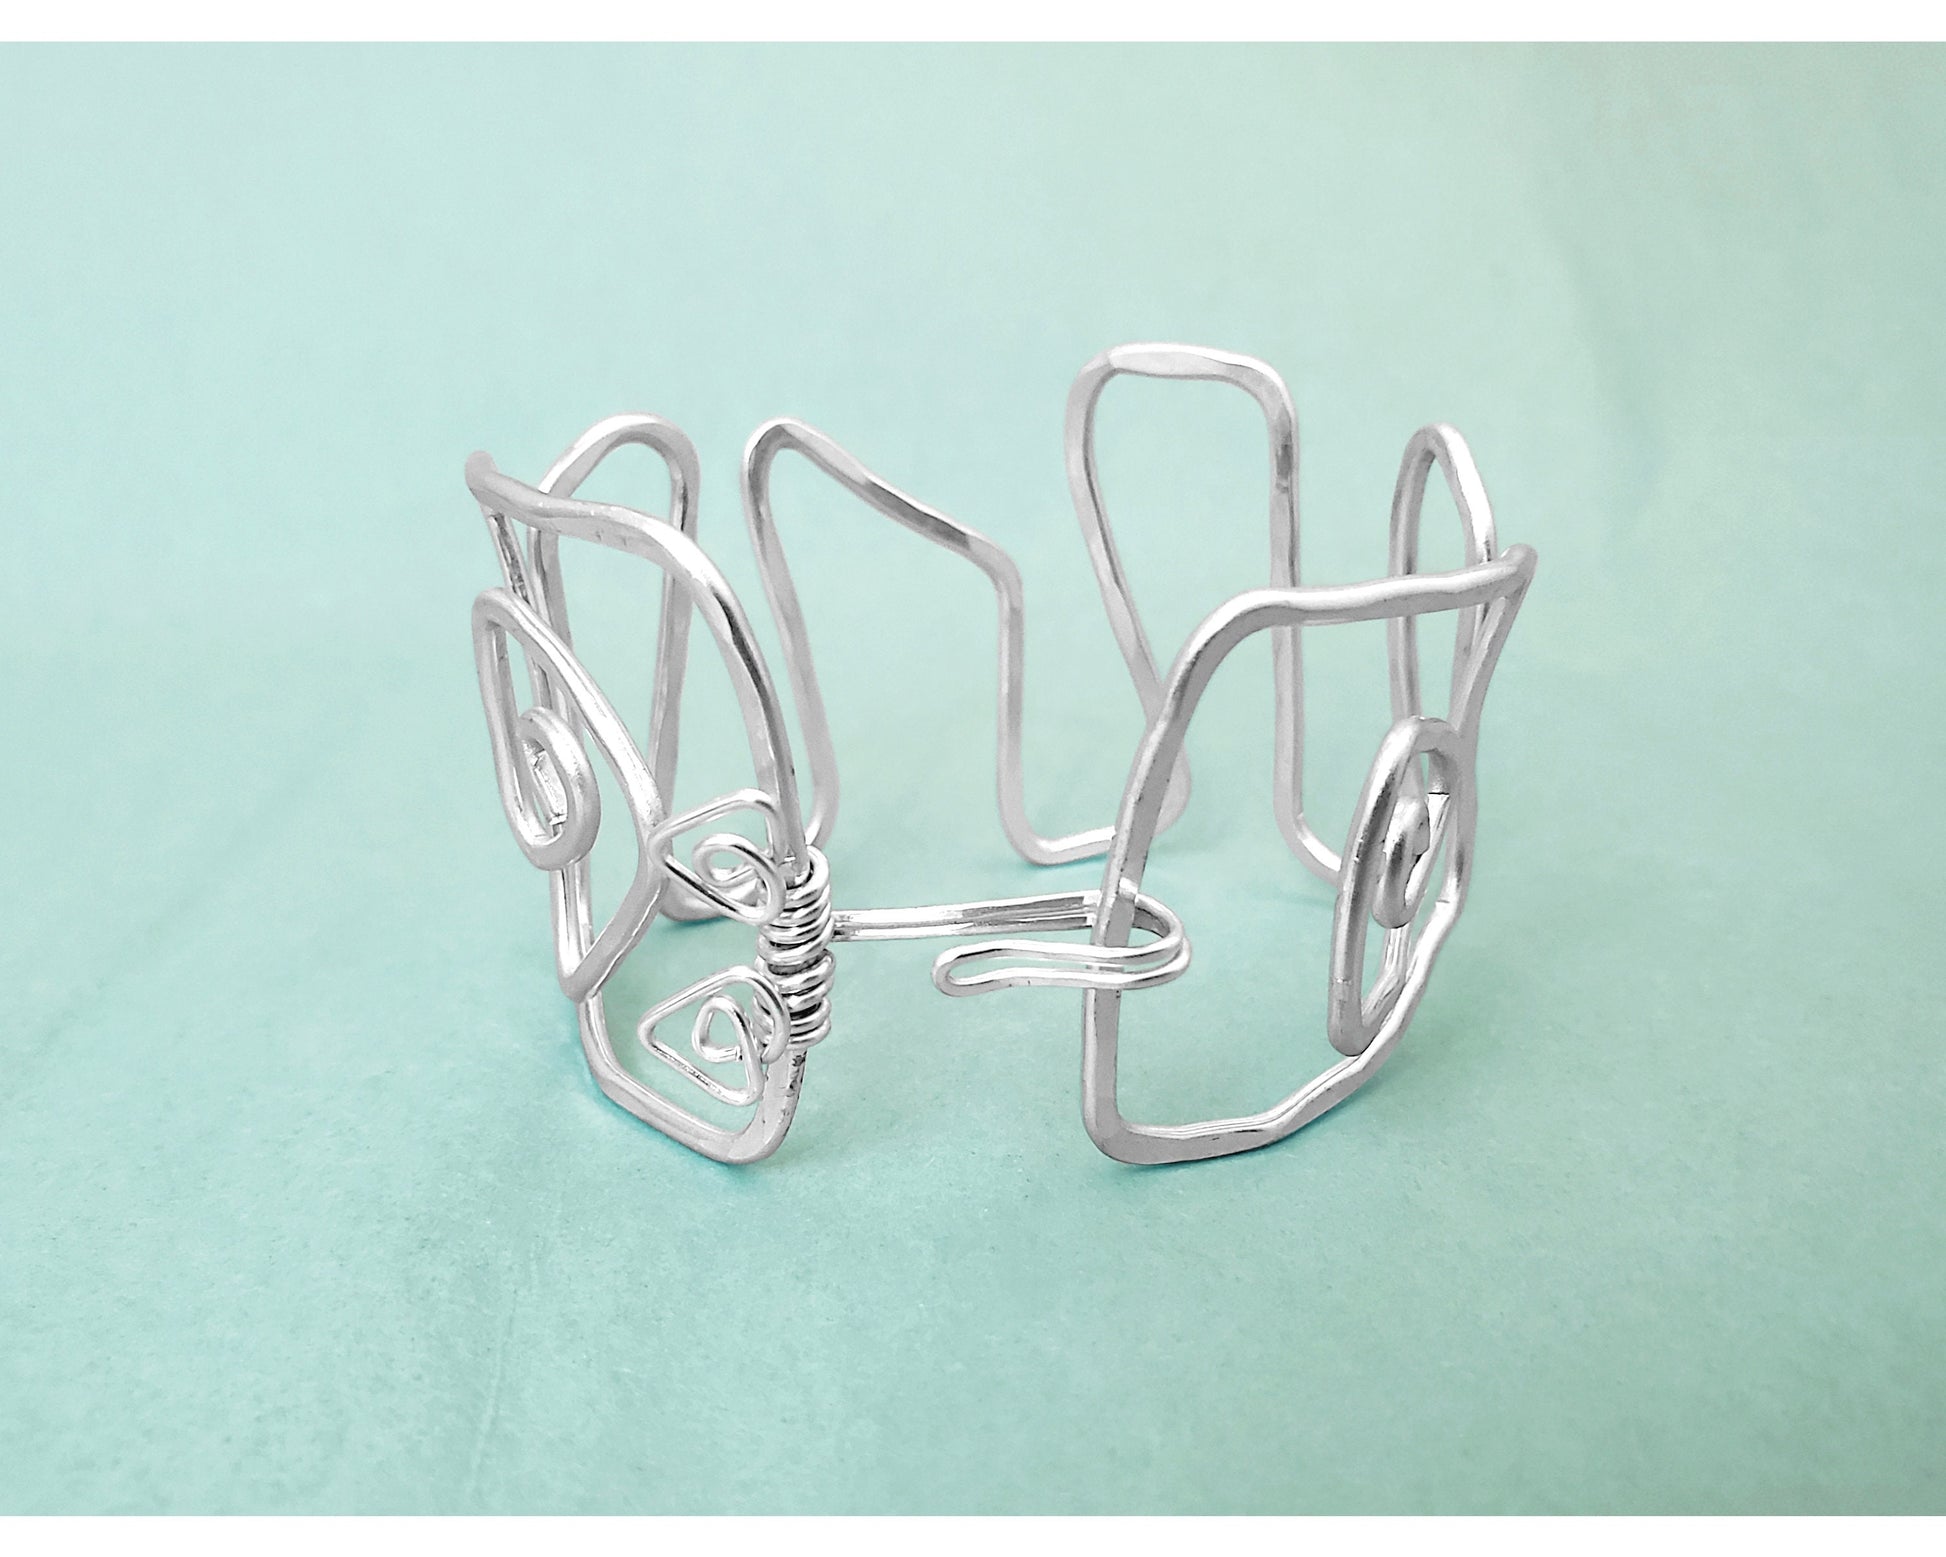 Minimalist Statement Cuff, Wonky Squared Shapes, Hammered Wire, Adjustable, Lightweight, Choice of Colors and Metals